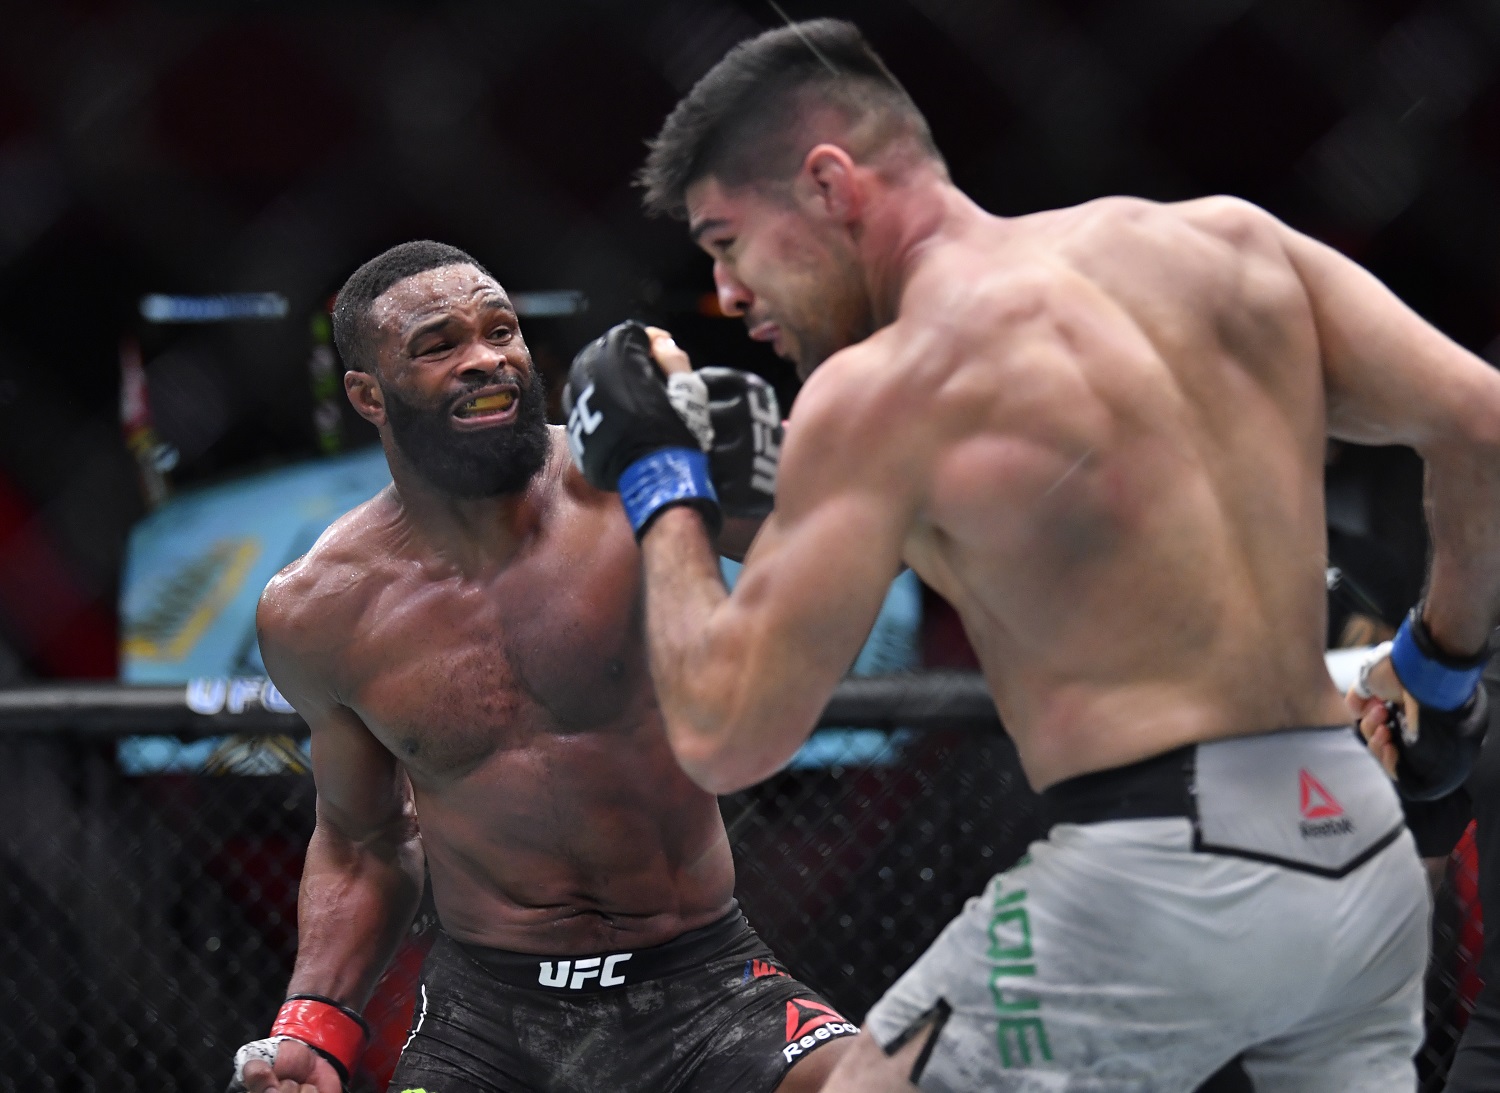 Tyron Woodley, left, punches Vicente Luque in their welterweight fight during the UFC 260 event on March 27, 2021 in Las Vegas.